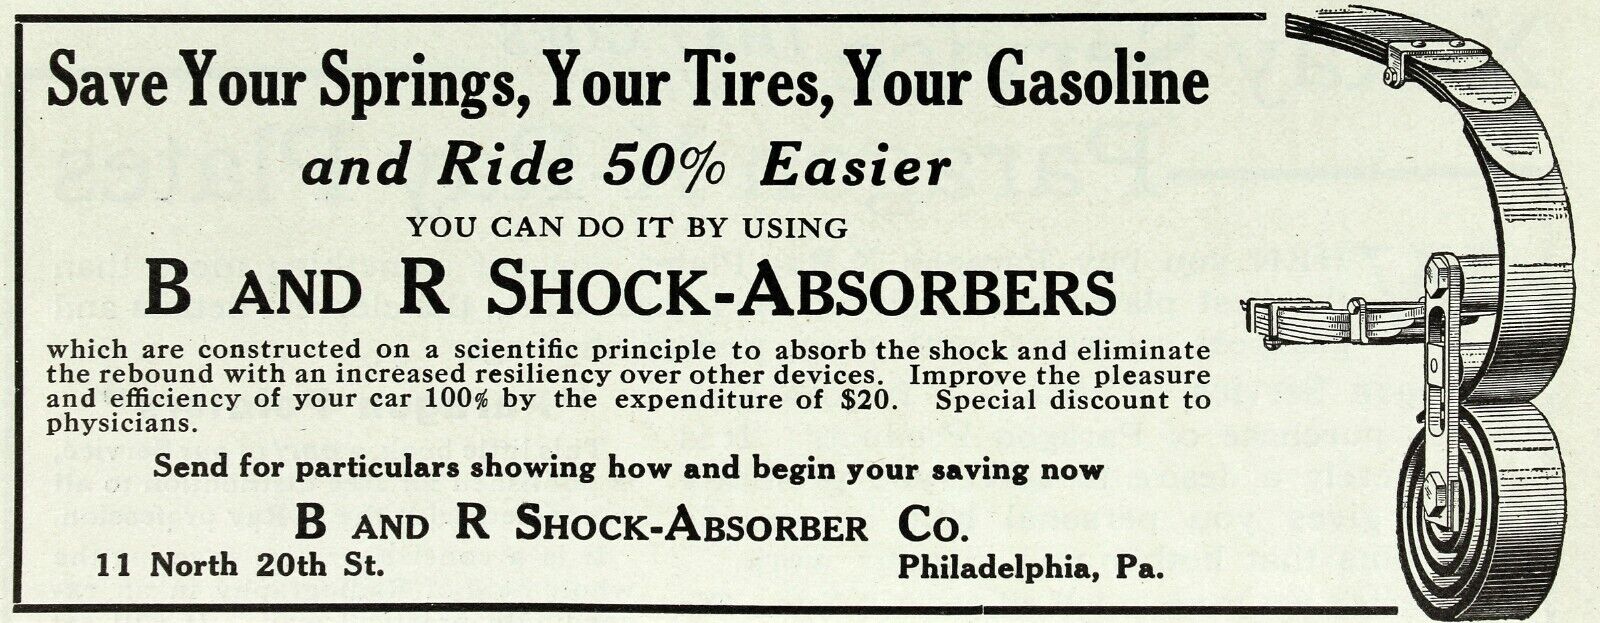 1915 B AND R SHOCK-ABSORBERS Auto Advertising Original Antique Print Ad